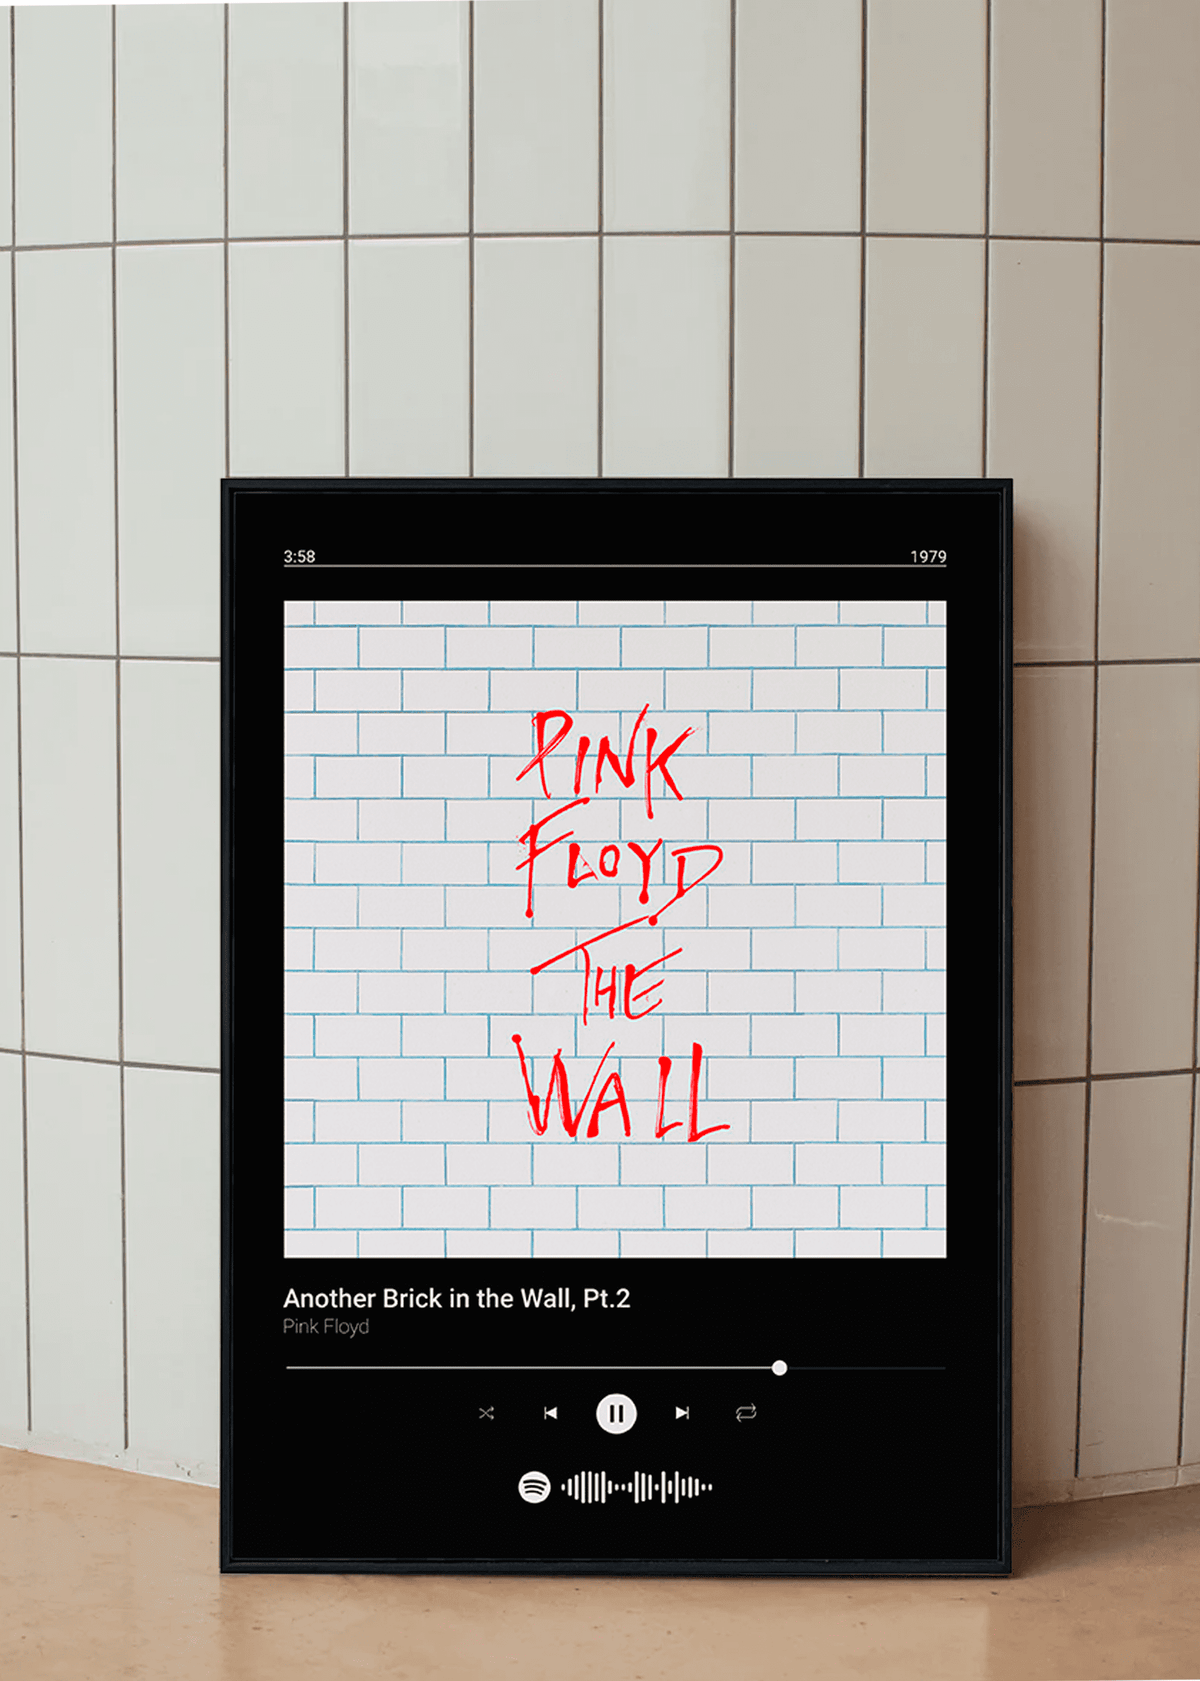 Another Brick in the Wall, Pt.2 - Pink Floyd